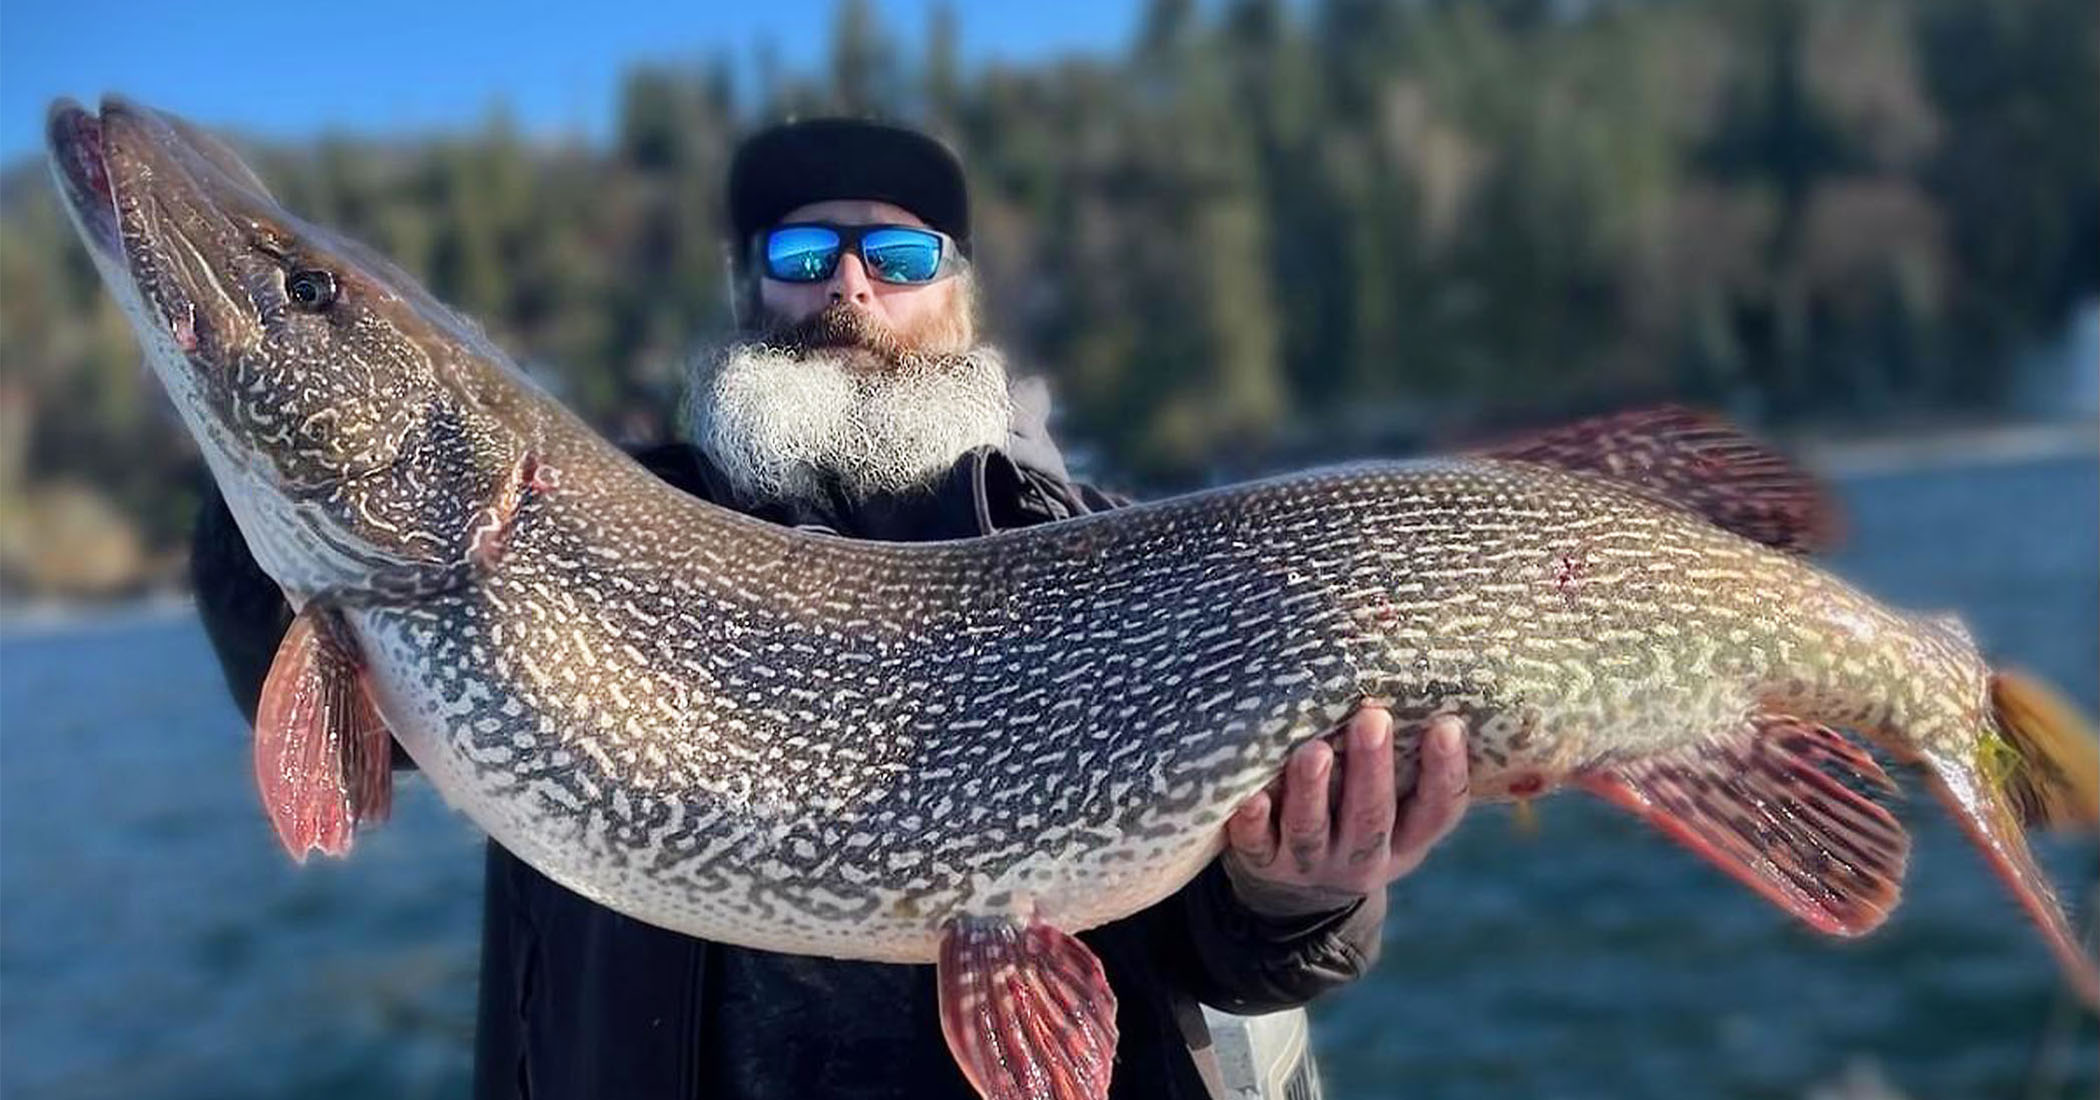 NextImg:‘We needed to find a bigger scale’: Idaho angler reels in monster pike weighing over 40 pounds for state record